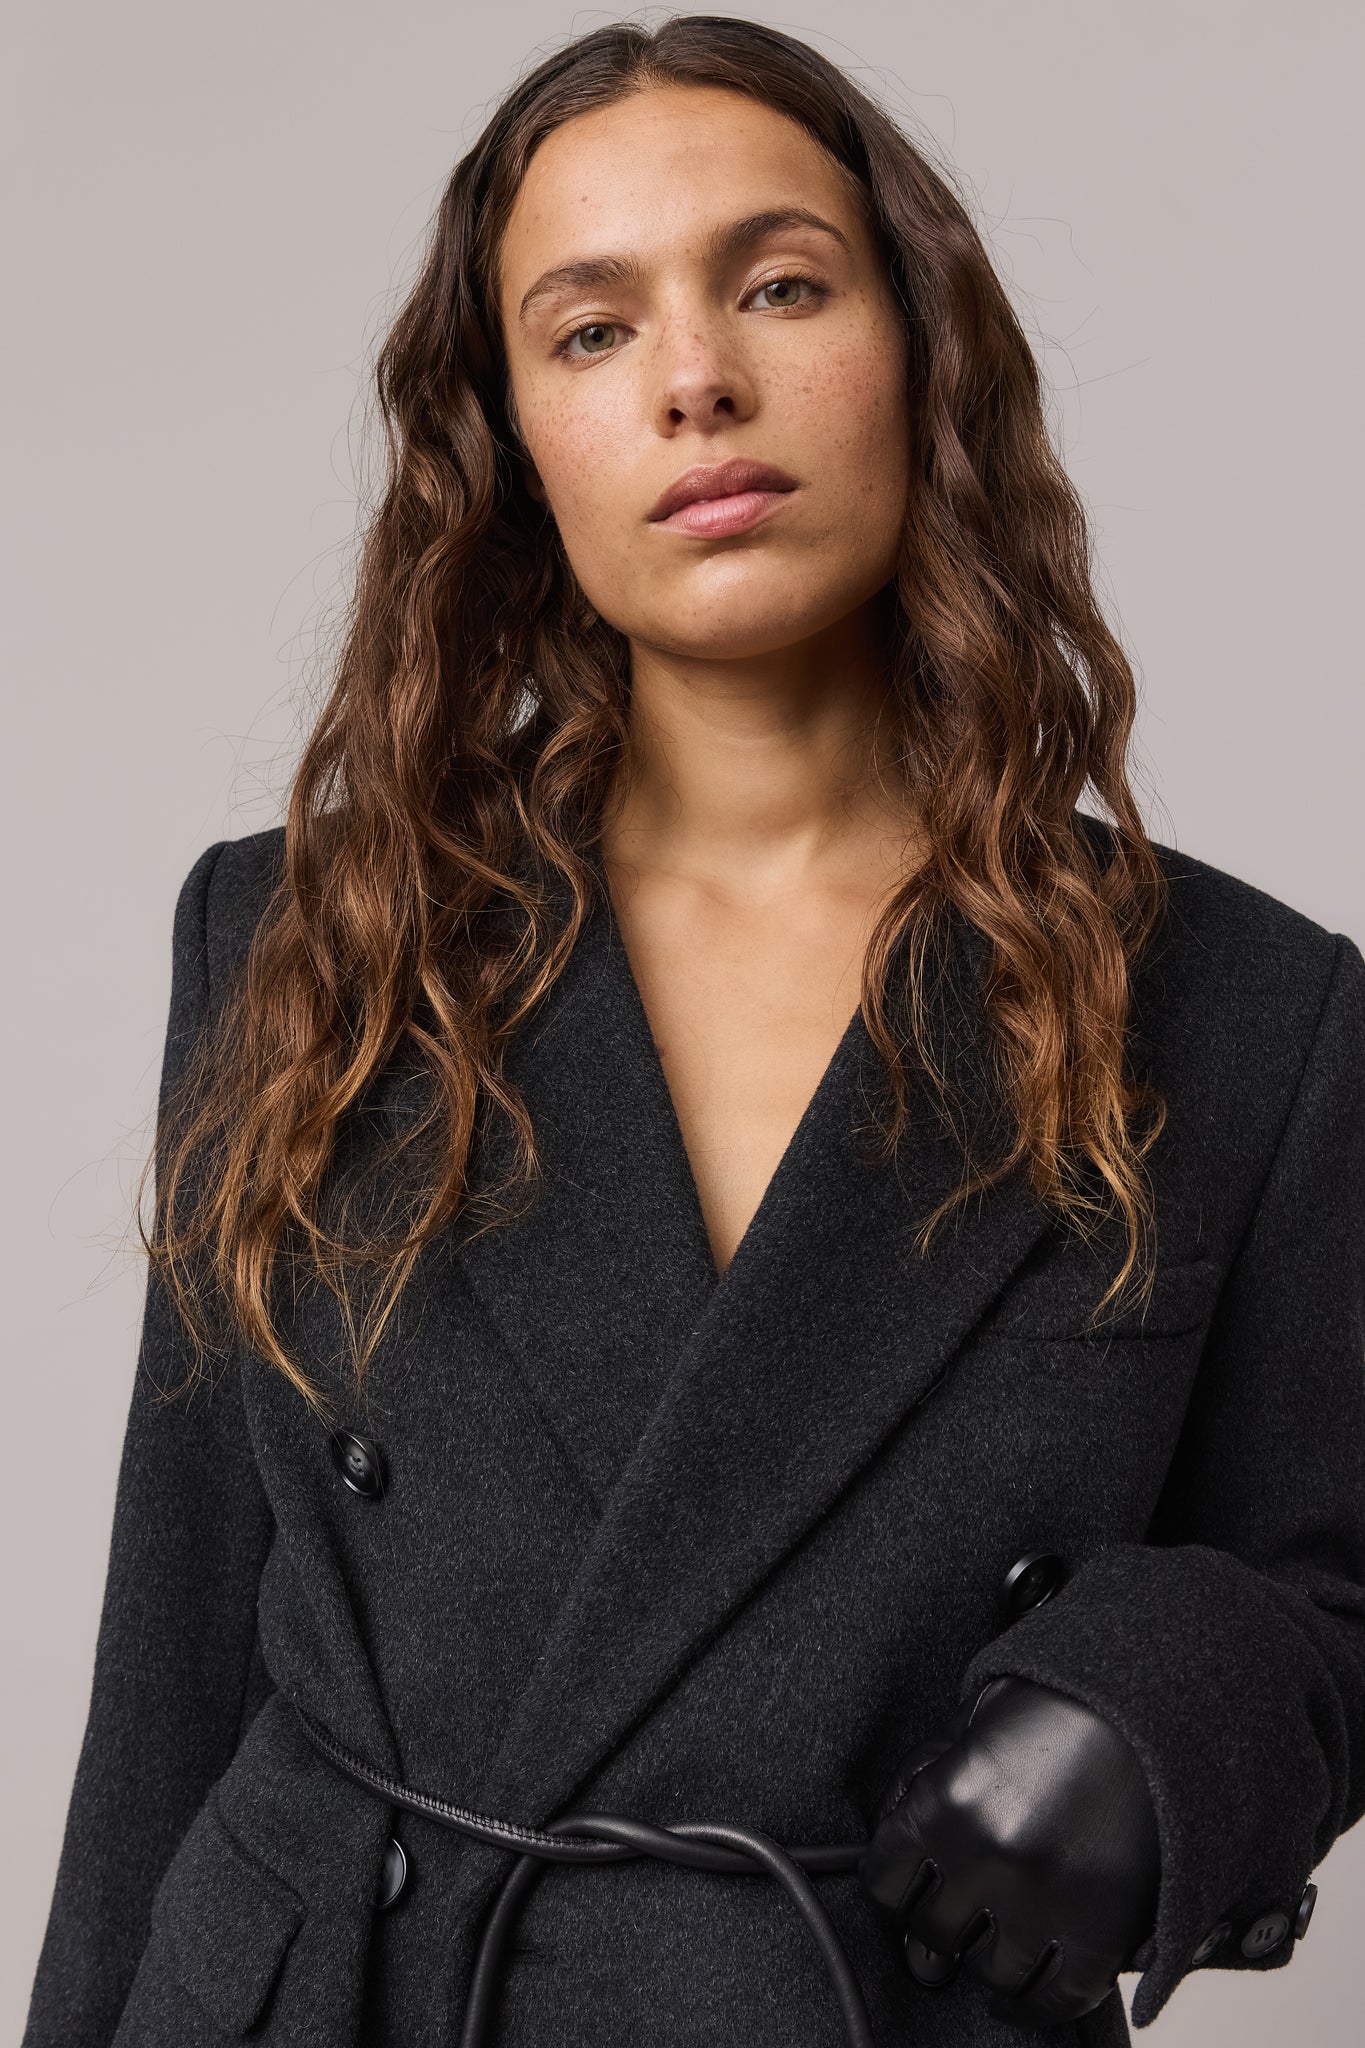 Moby Tailored Wool Duster Coat